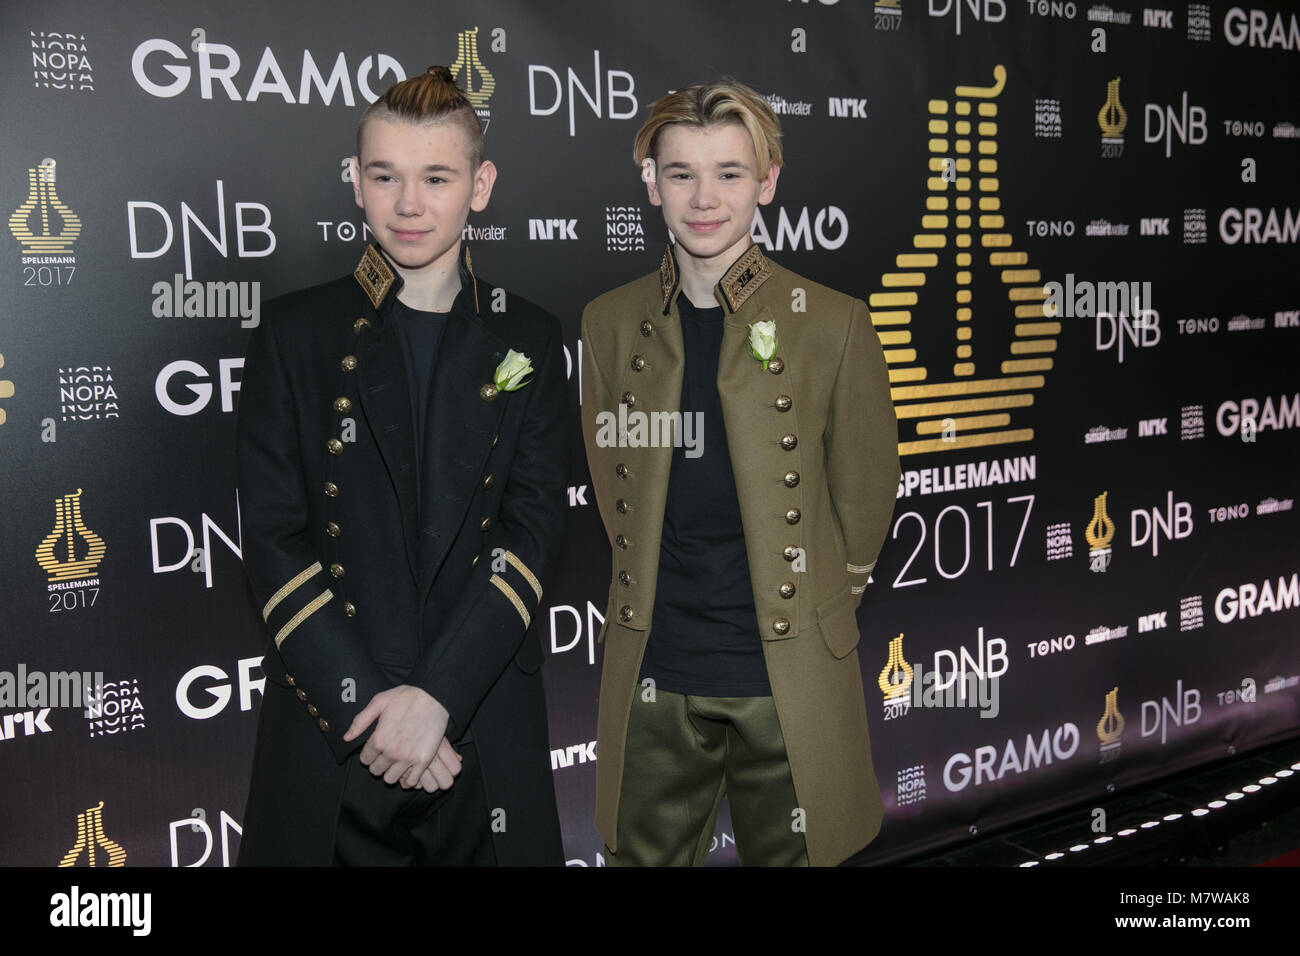 Norway, Oslo - February 25, 2018. The Norwegian pop duo Marcus & Martinus at the red carpet at the Norwegian Grammy Awards, Spellemannprisen 2017, in Oslo. (Photo credit: Gonzales Photo - Stian S. Moller). Stock Photo